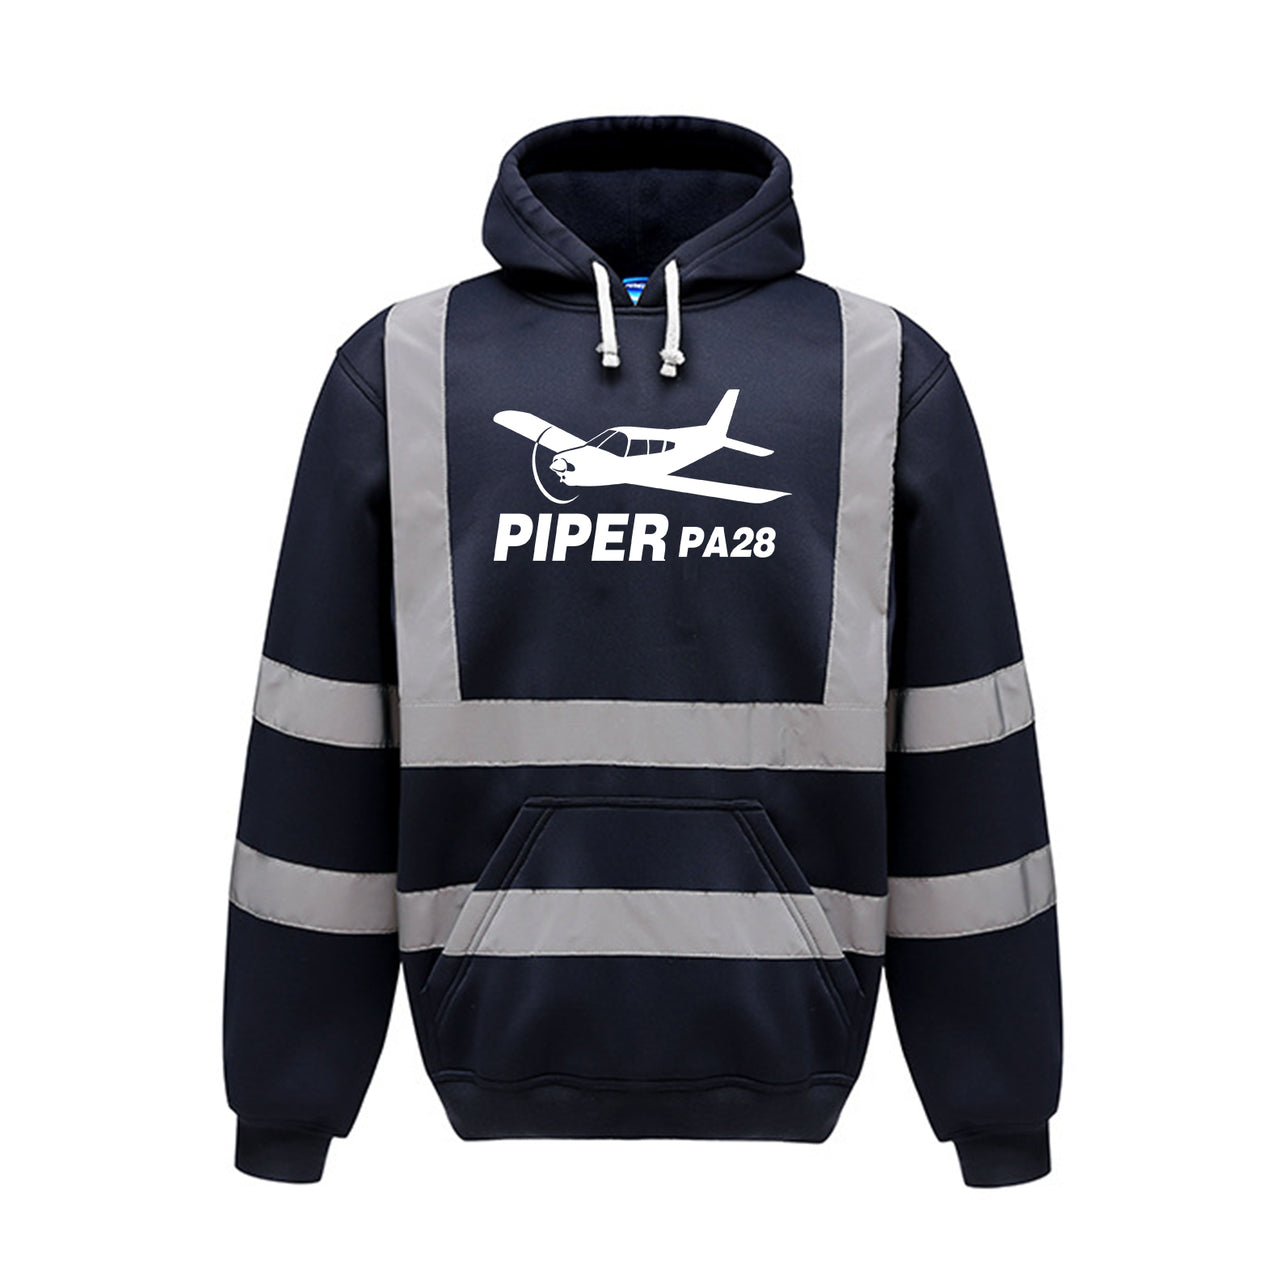 The Piper PA28 Designed Reflective Hoodies